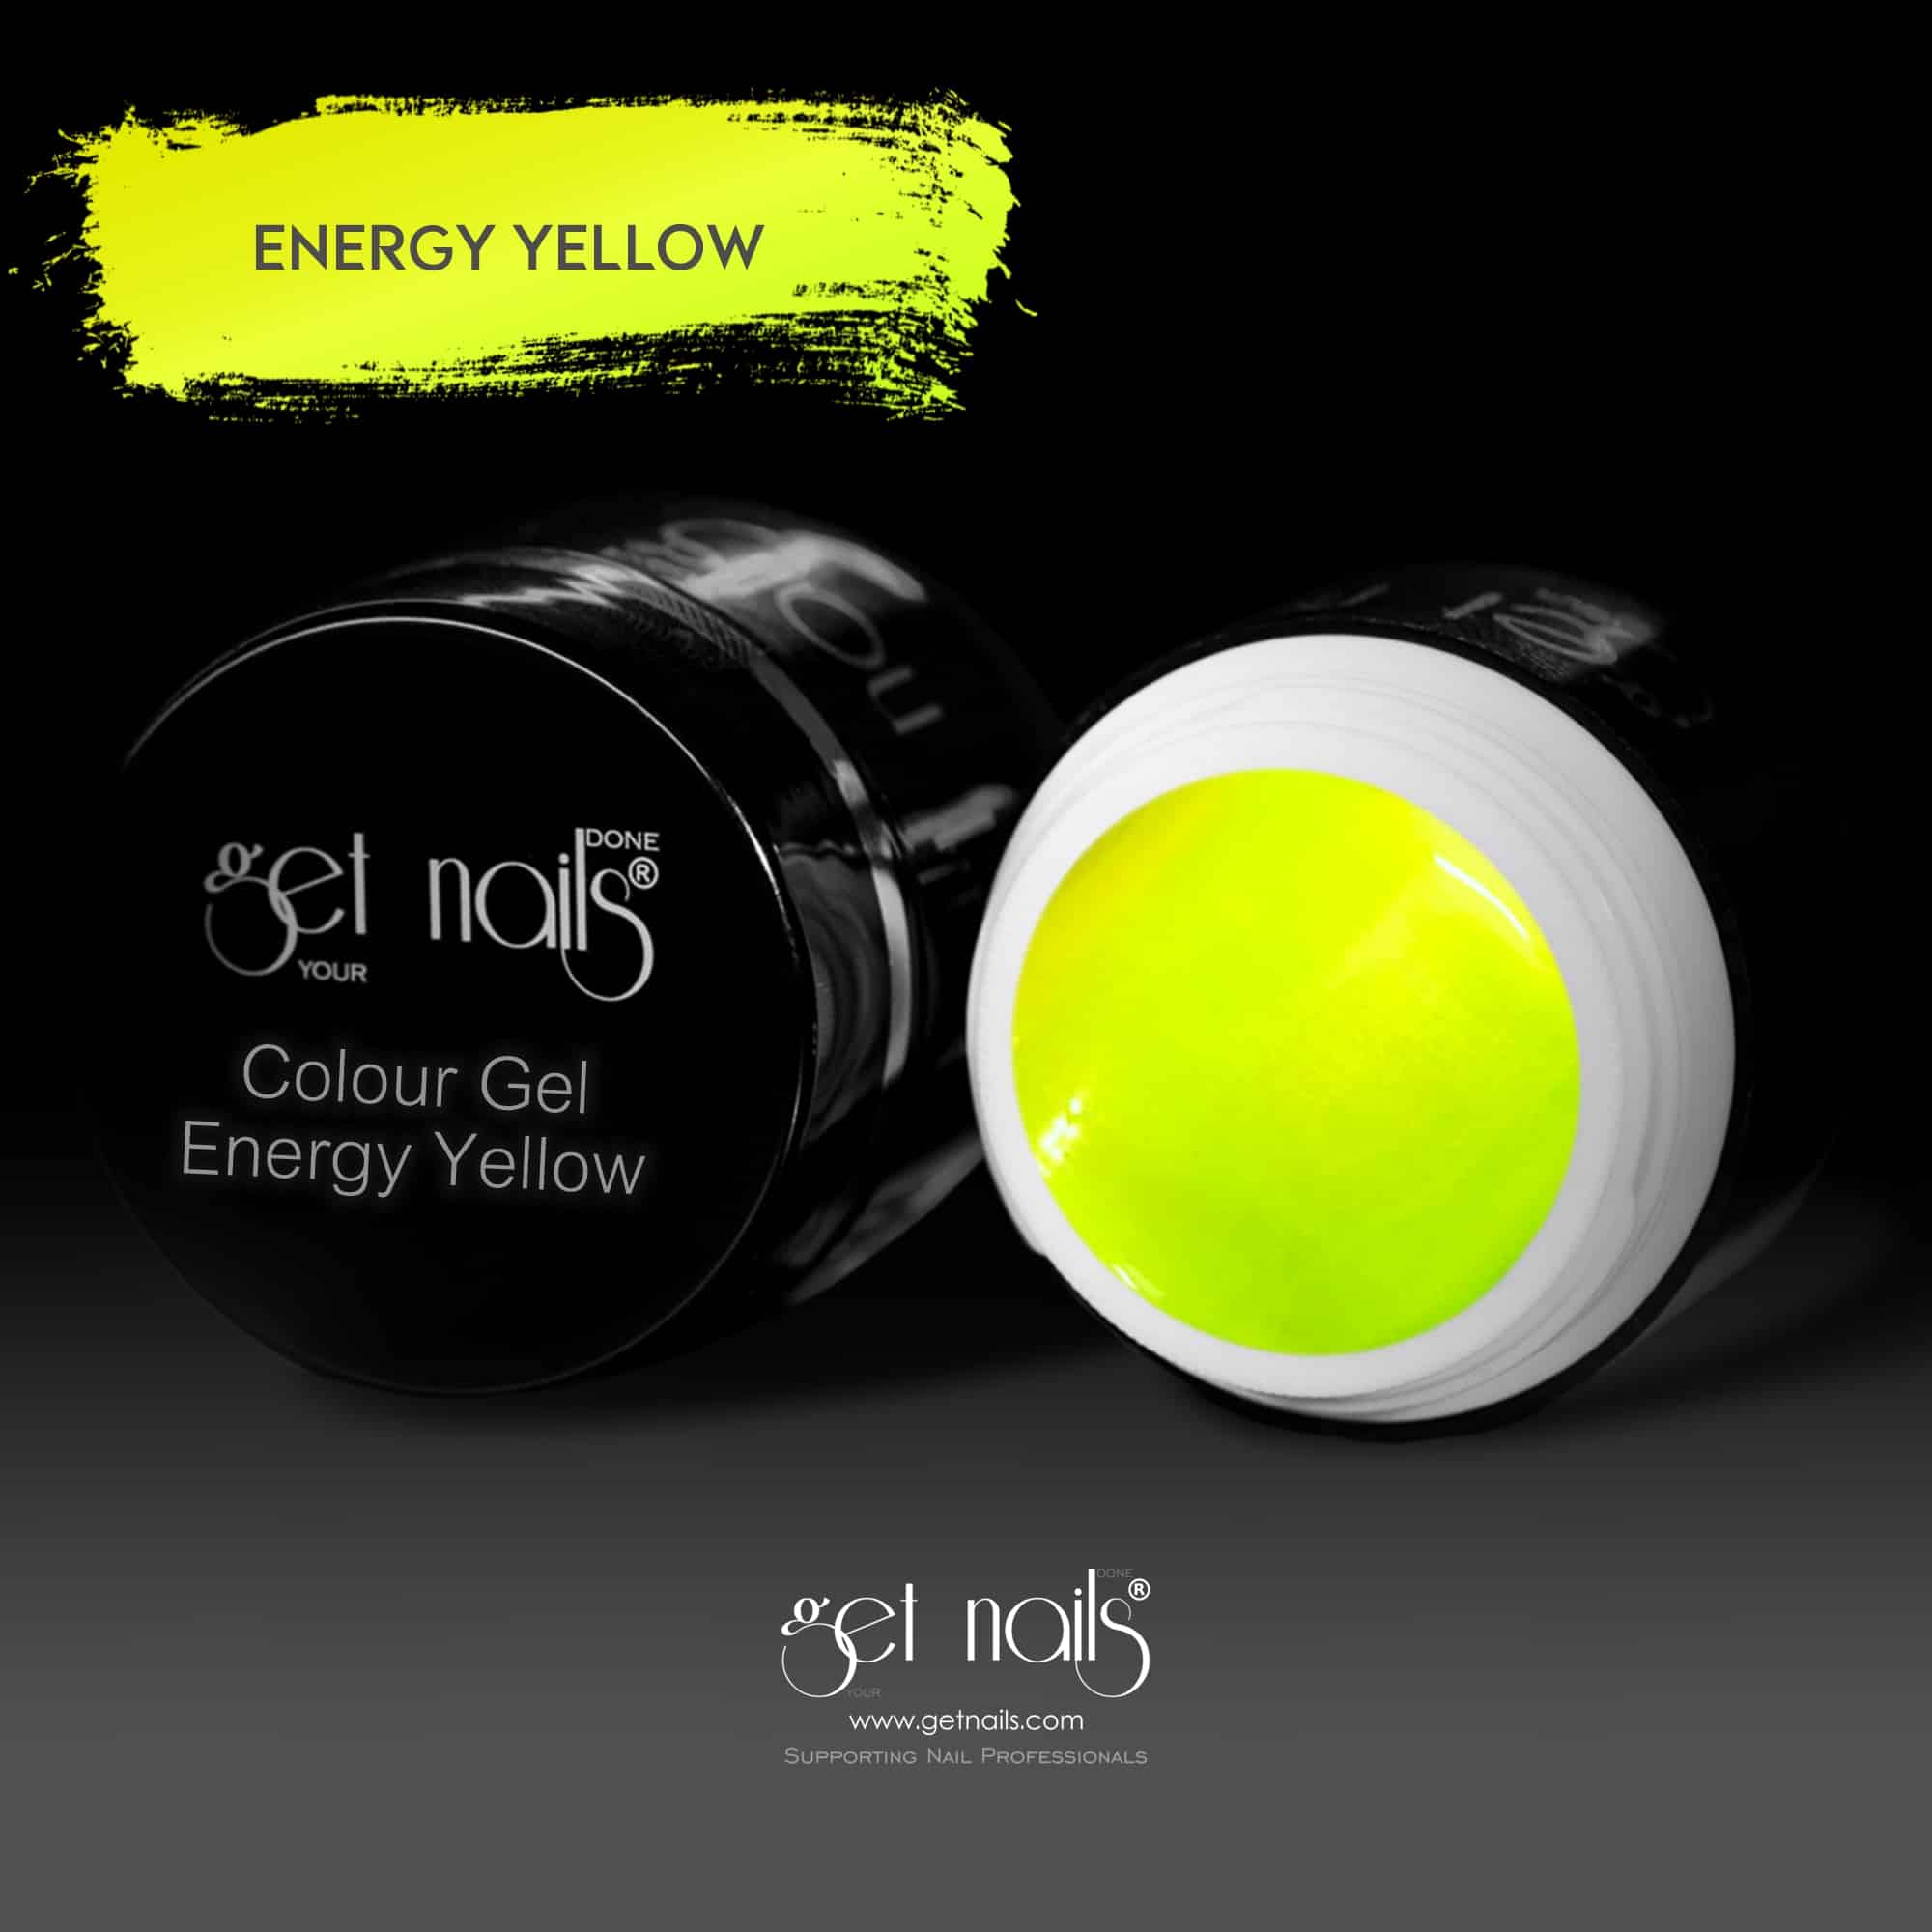 Get Nails Austria - Gel colorato Energy Yellow 5g